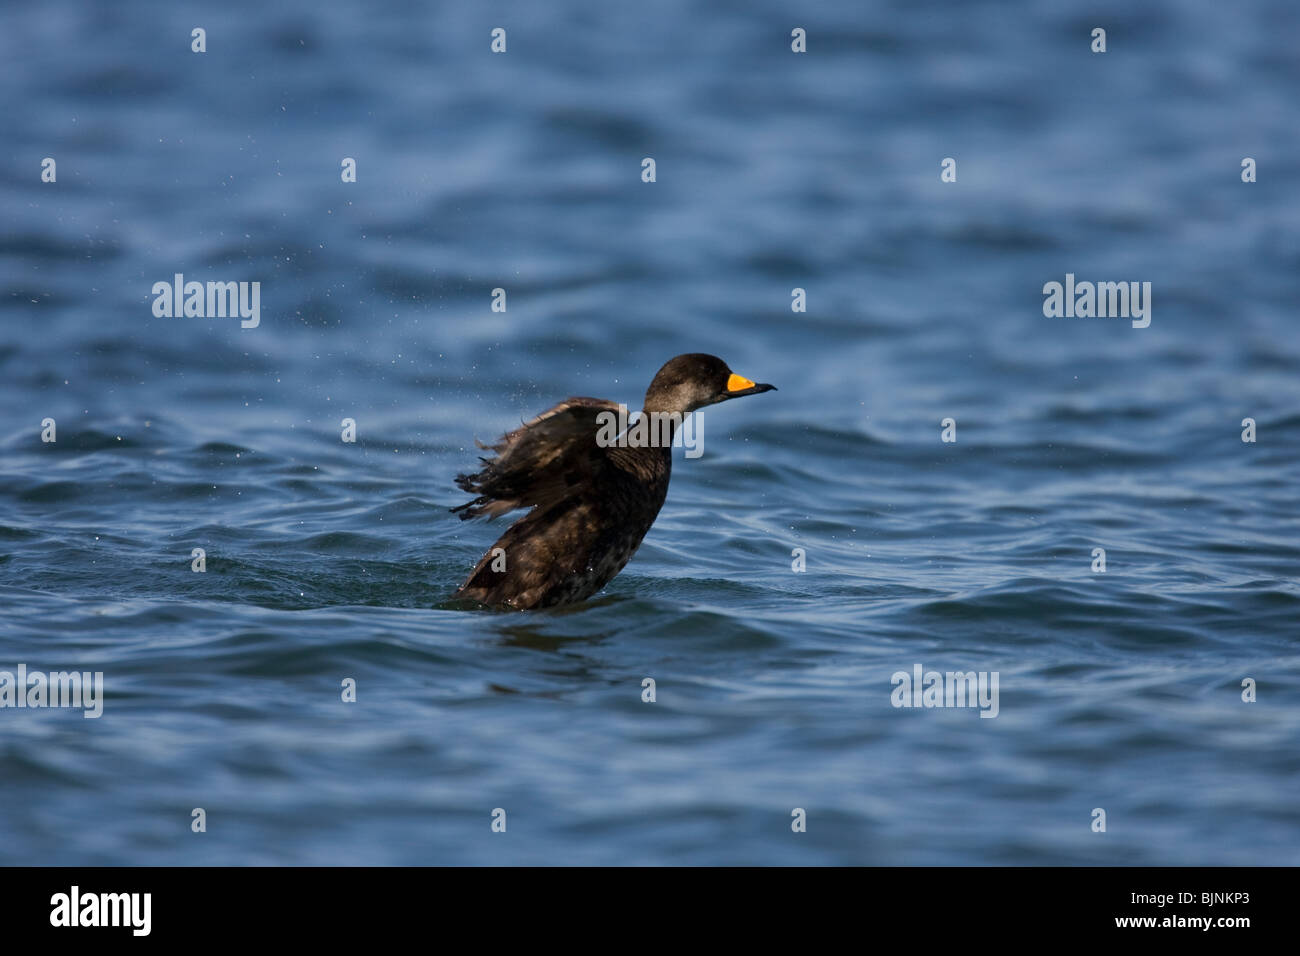 Black Scoter (Melanitta nigra americana), American subspecies, male rearing out of water to flap wings. Stock Photo